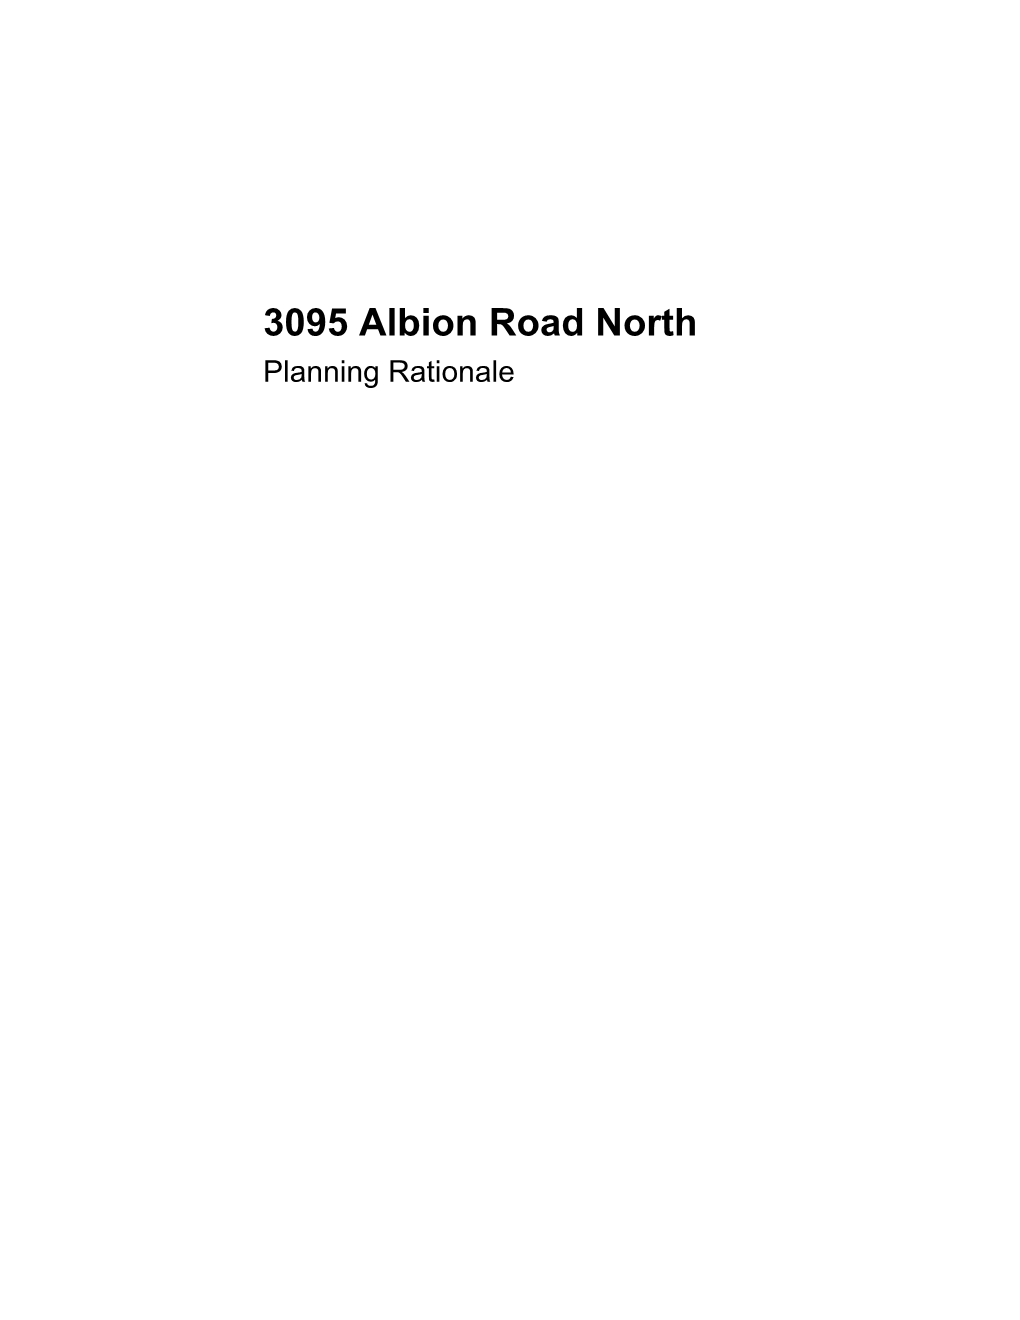 3095 Albion Road North Planning Rationale